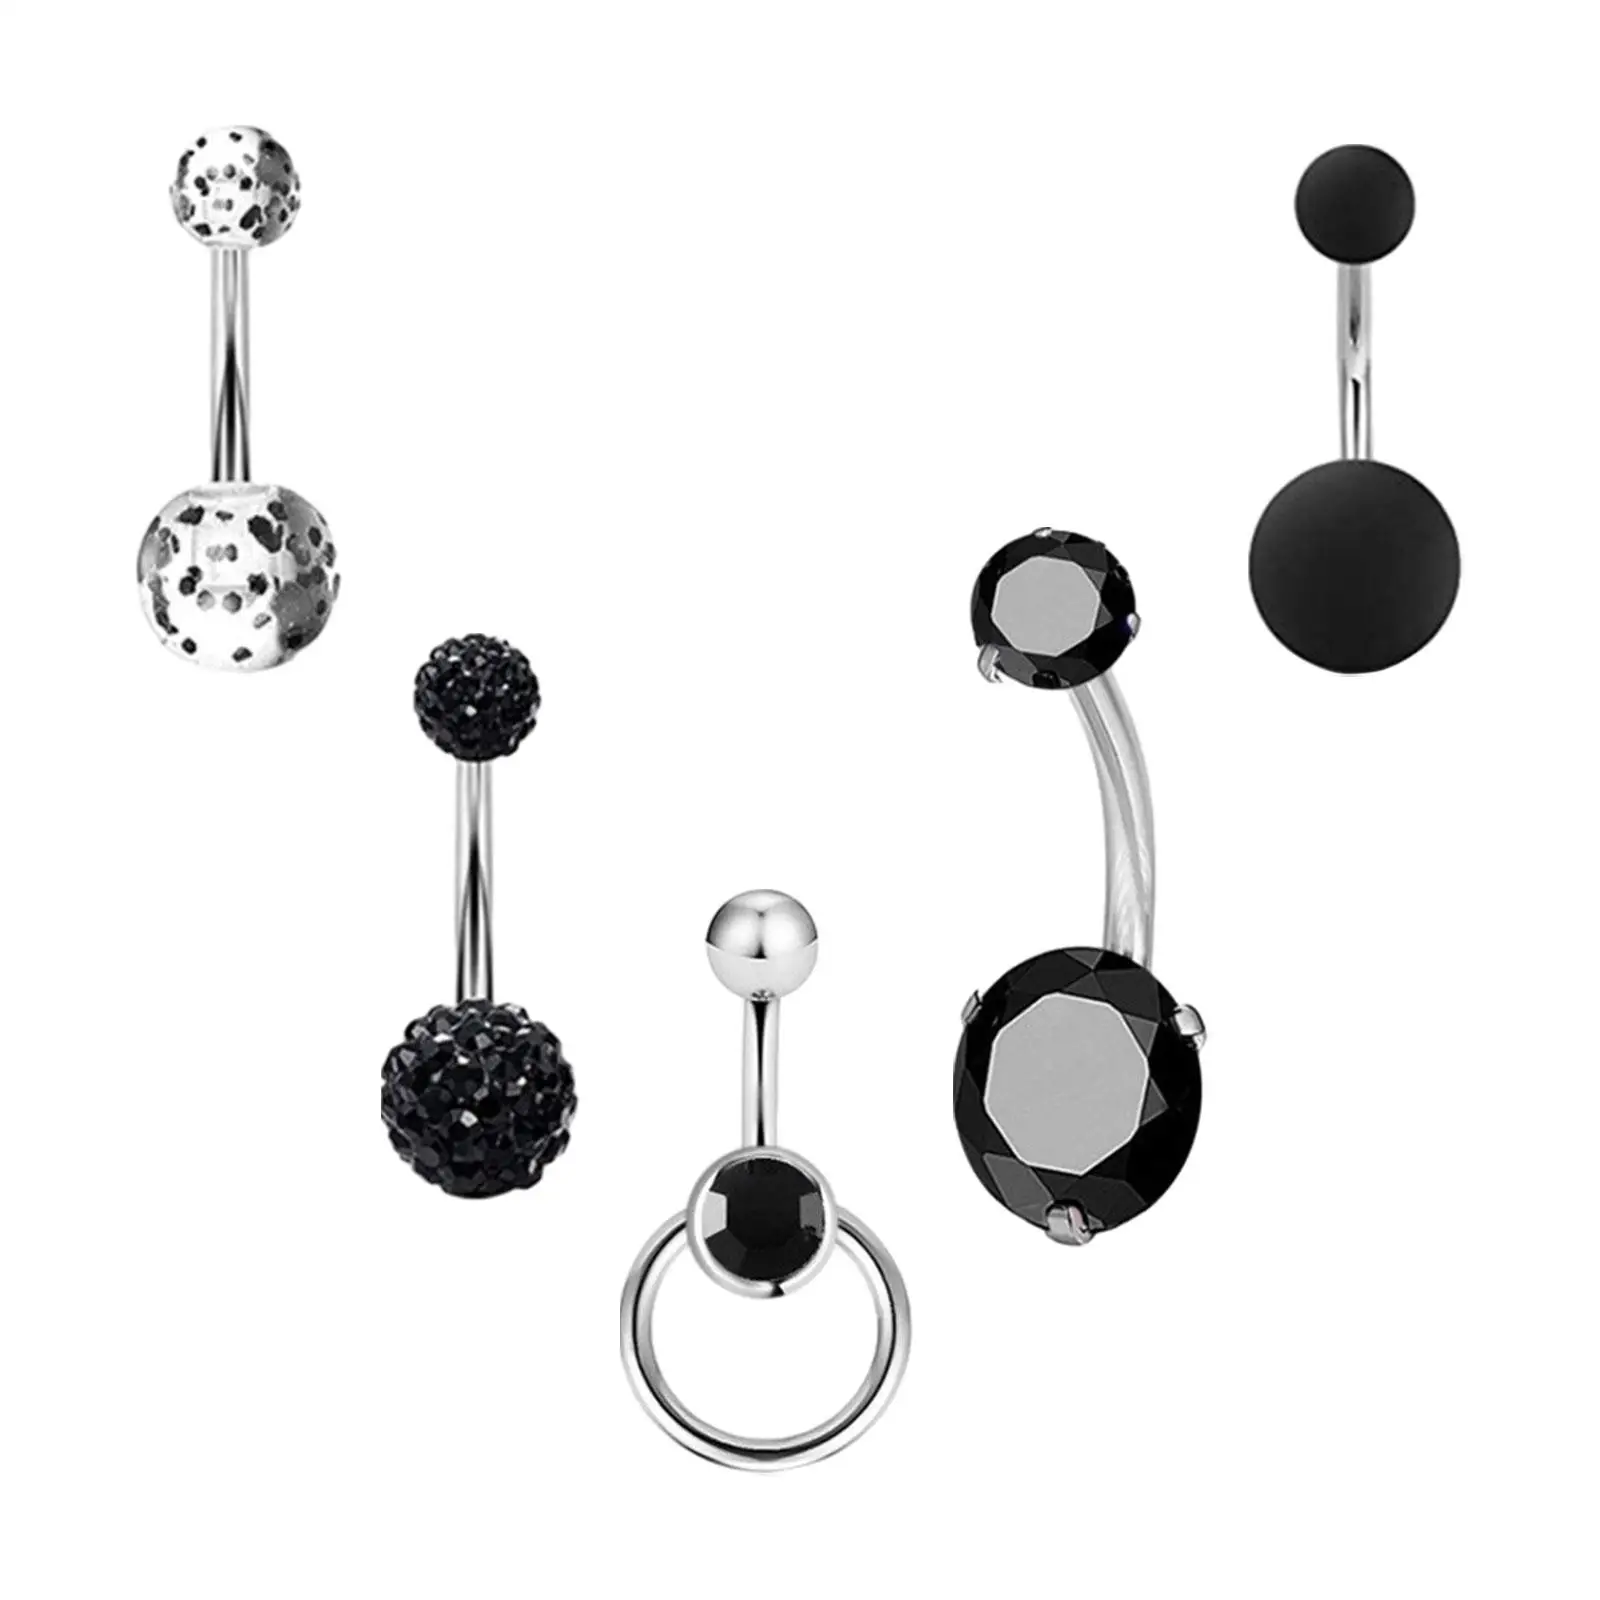 5x Belly Button Rings 10mm Short Stainless Steel Fashion Navel Barbell Stud